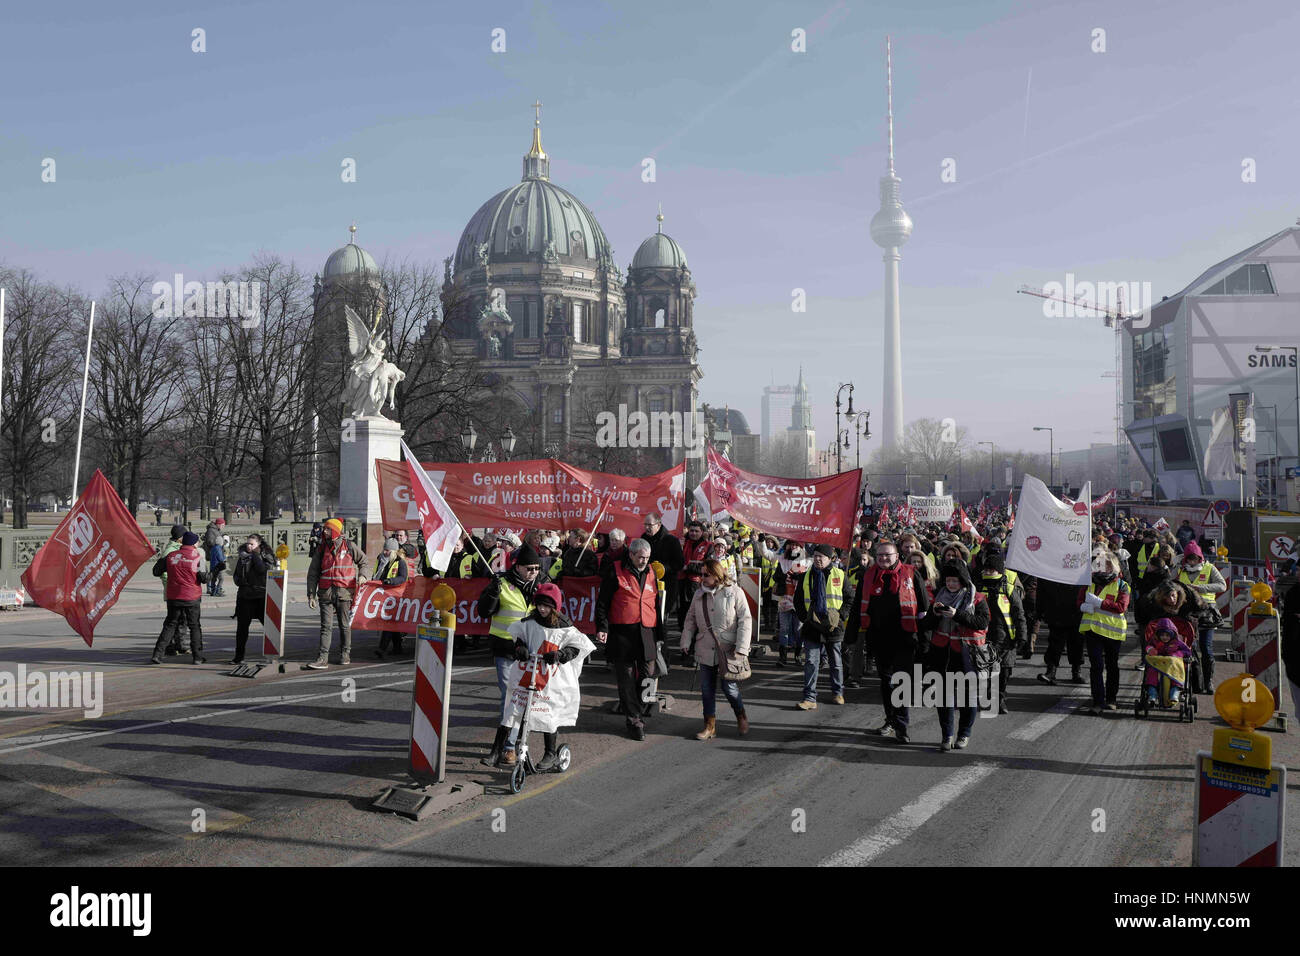 Berlin, Berlin, Germany. 14th Feb, 2017. Around 6000 employees in the public service demonstrate rally Berlin for more wages. They gathered at Alexanderplatz and rally to Brandenburg Gate. Participants from public administrations, schools and day care centers demand up to six percent more wages. So far the collective agreement has rejected this as too high. The next round of negotiations is scheduled for Thursday. Credit: Jan Scheunert/ZUMA Wire/Alamy Live News Stock Photo